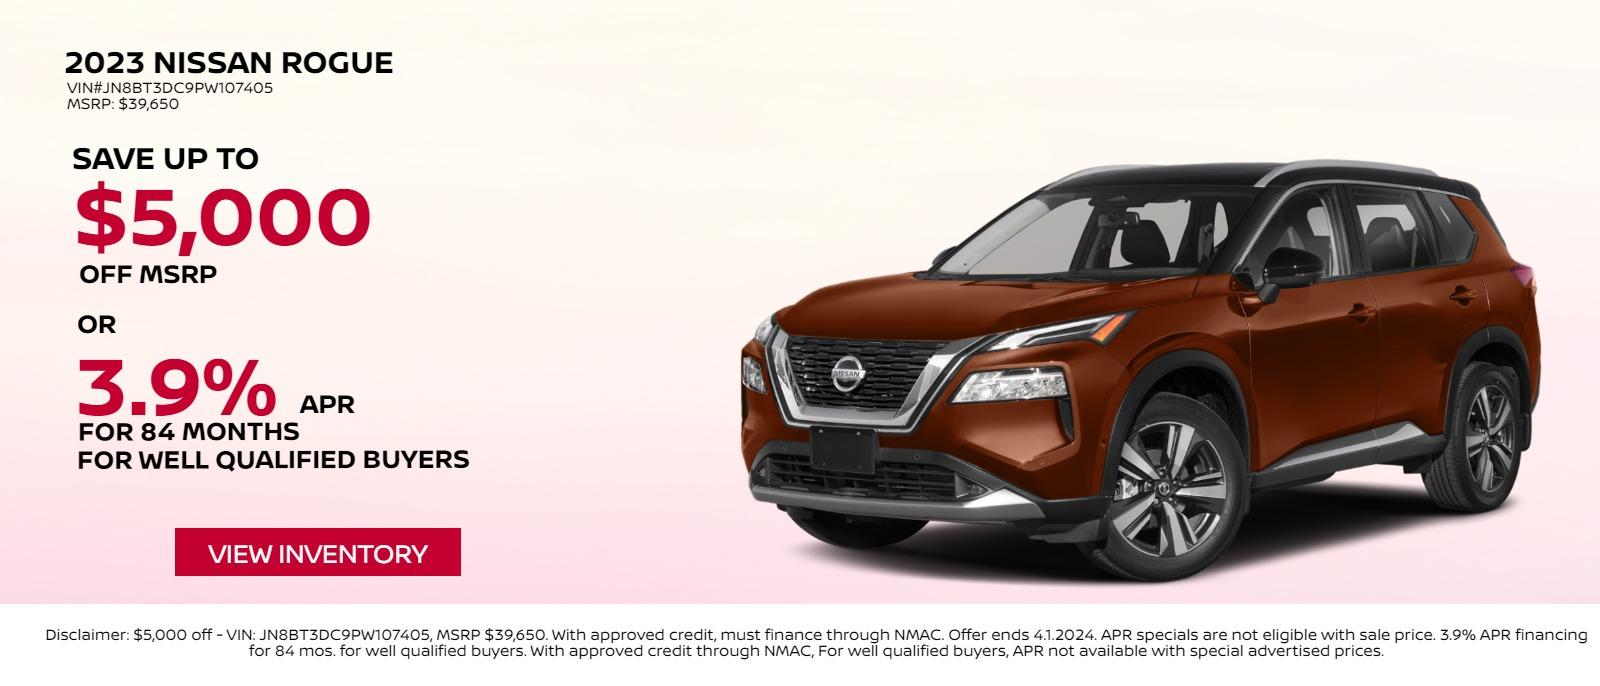 Top 5 Reasons to Consider a Nissan Certified Pre-Owned